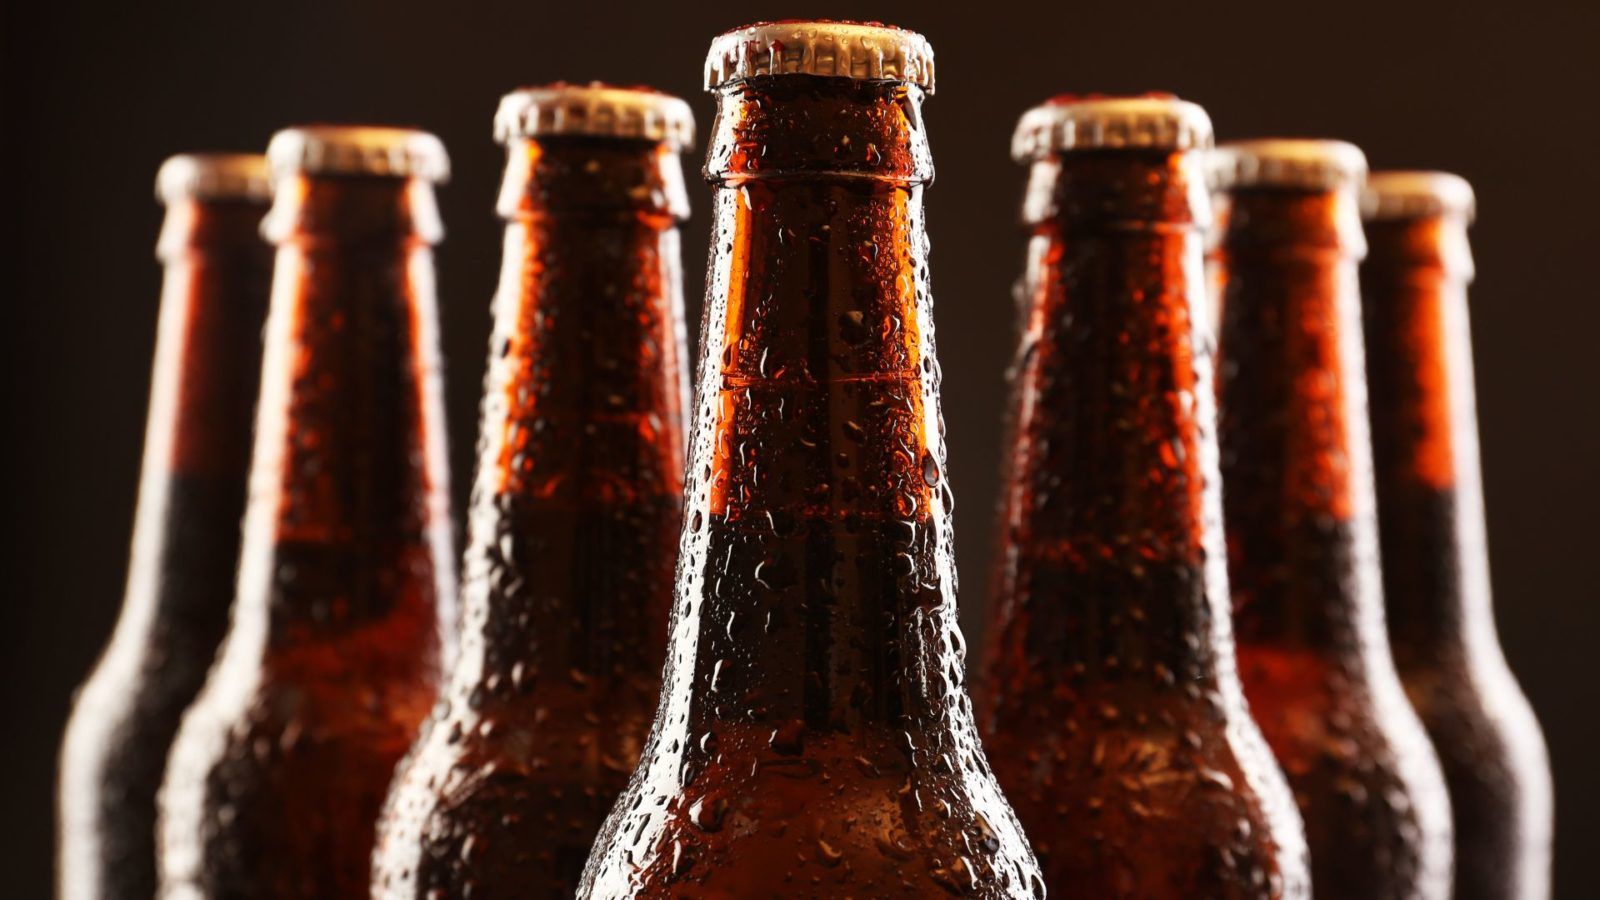 Heady hops: 10 of the strongest beers in India to liven up any party